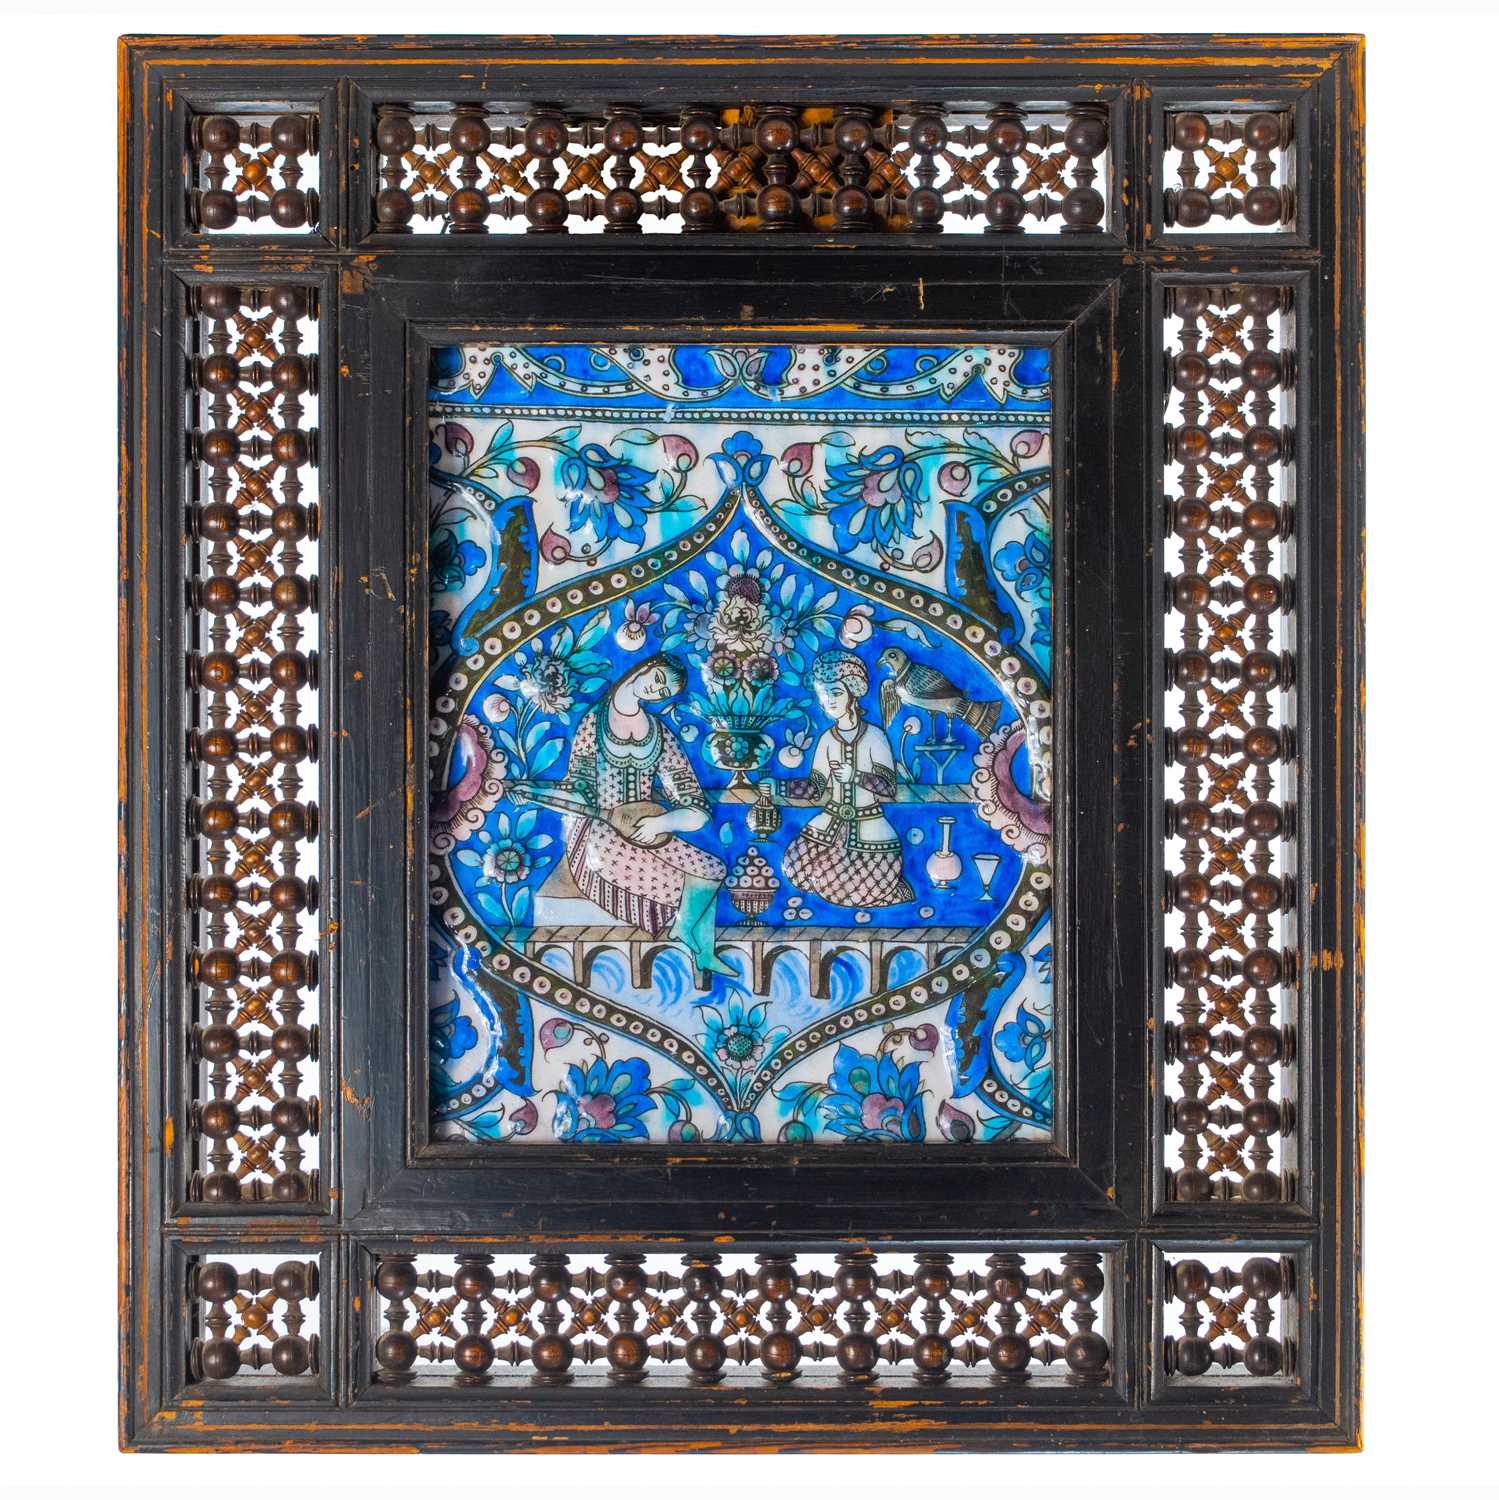 Lot 2 - A large Persian Qajar painted moulded pottery tile, 19th century.